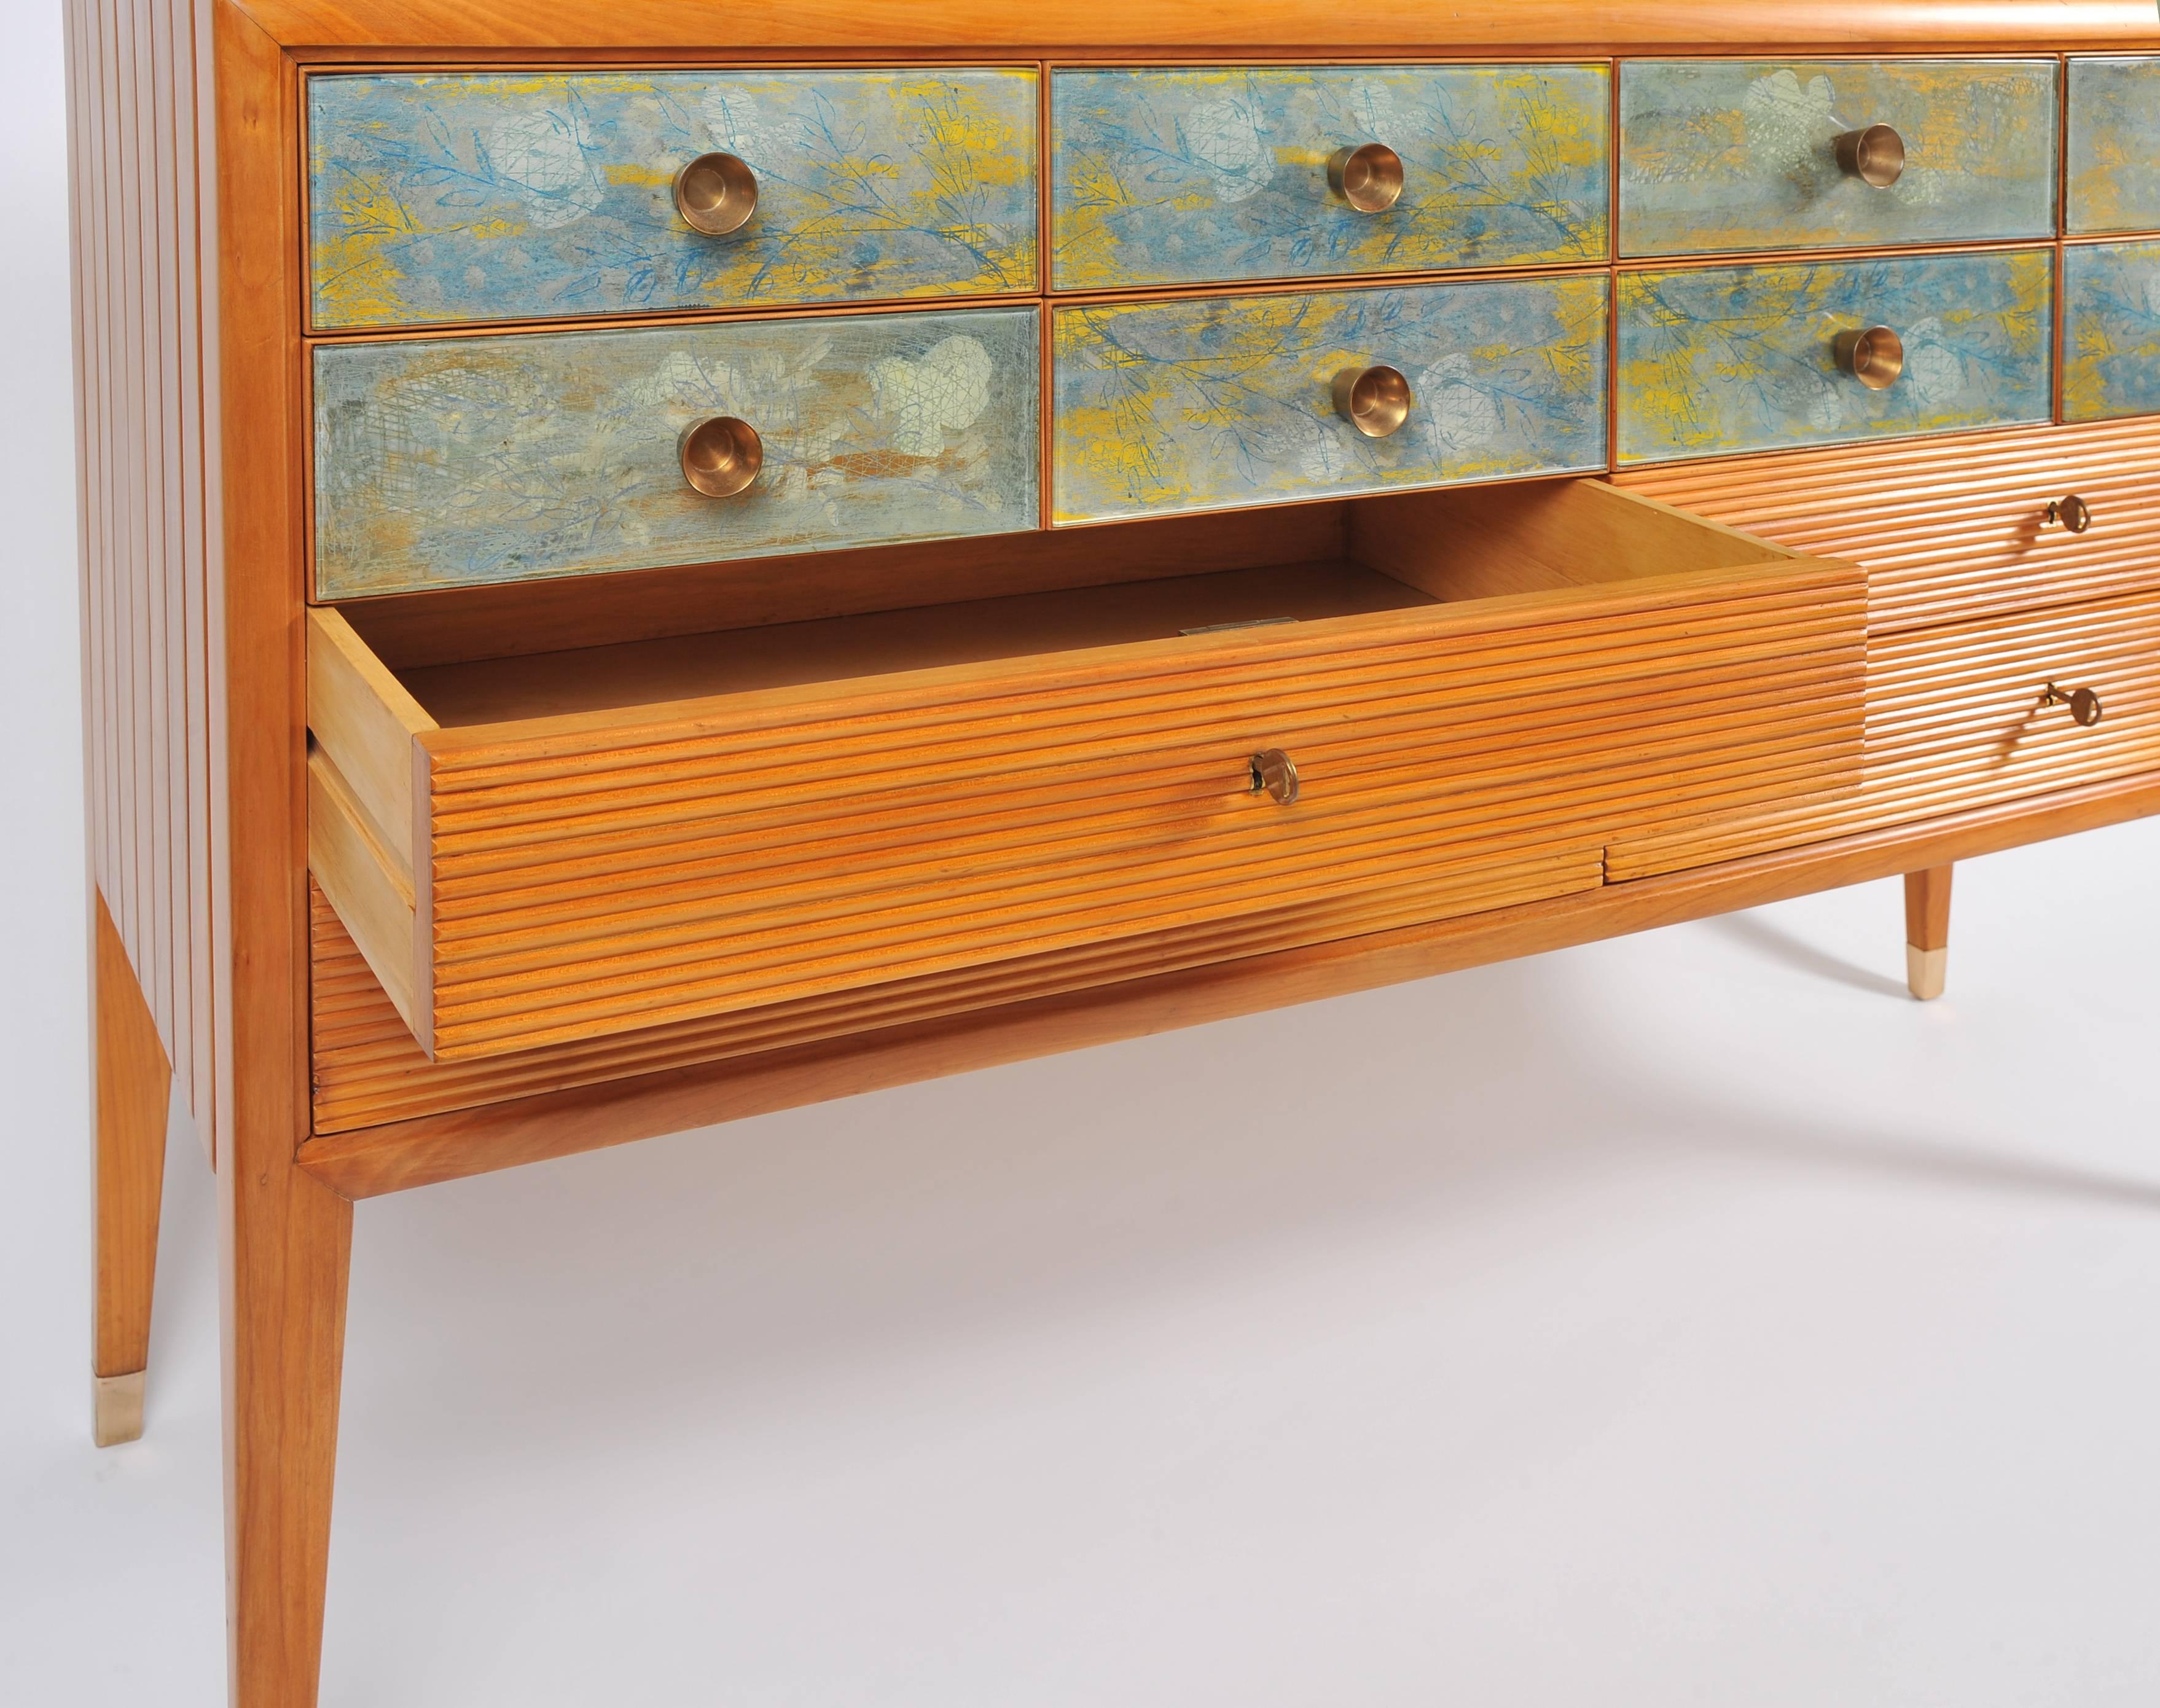 Impressive and rare 12-drawer credenza of exceptional craftsmanship and design. Attributed to Osvaldo Borsani, with drawers by Adriano Spilimbergo circa 1952.  Top eight drawers are fronted with reverse-painted abstract designs in soft blues greens